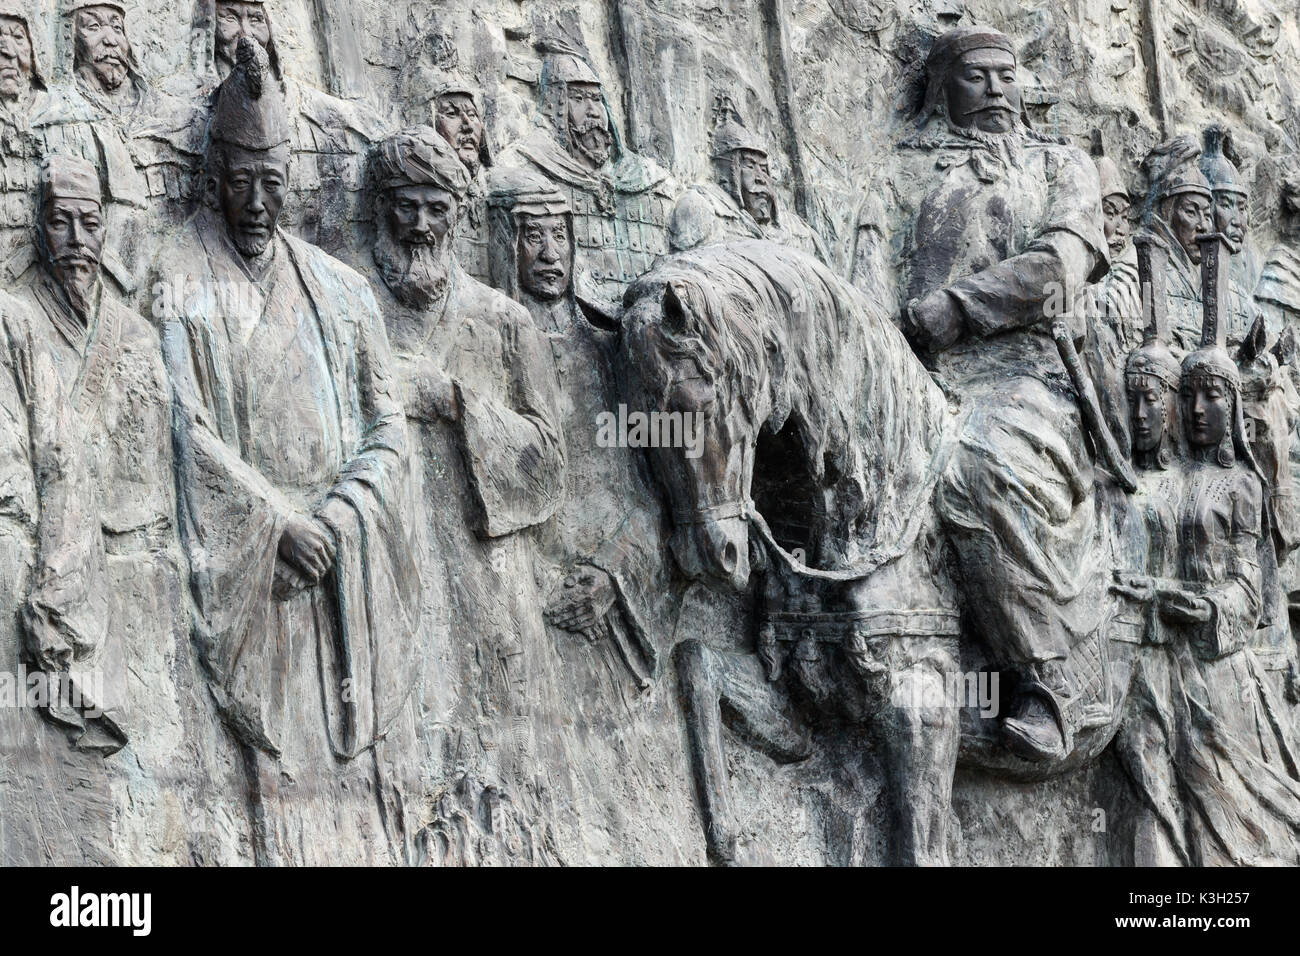 The site of Xanadu, Inner Mongolia, China - July 26, 2017: Reliefs and the statue of Kublai Khan grandson of Genghis Khan.The site under the protecti Stock Photo